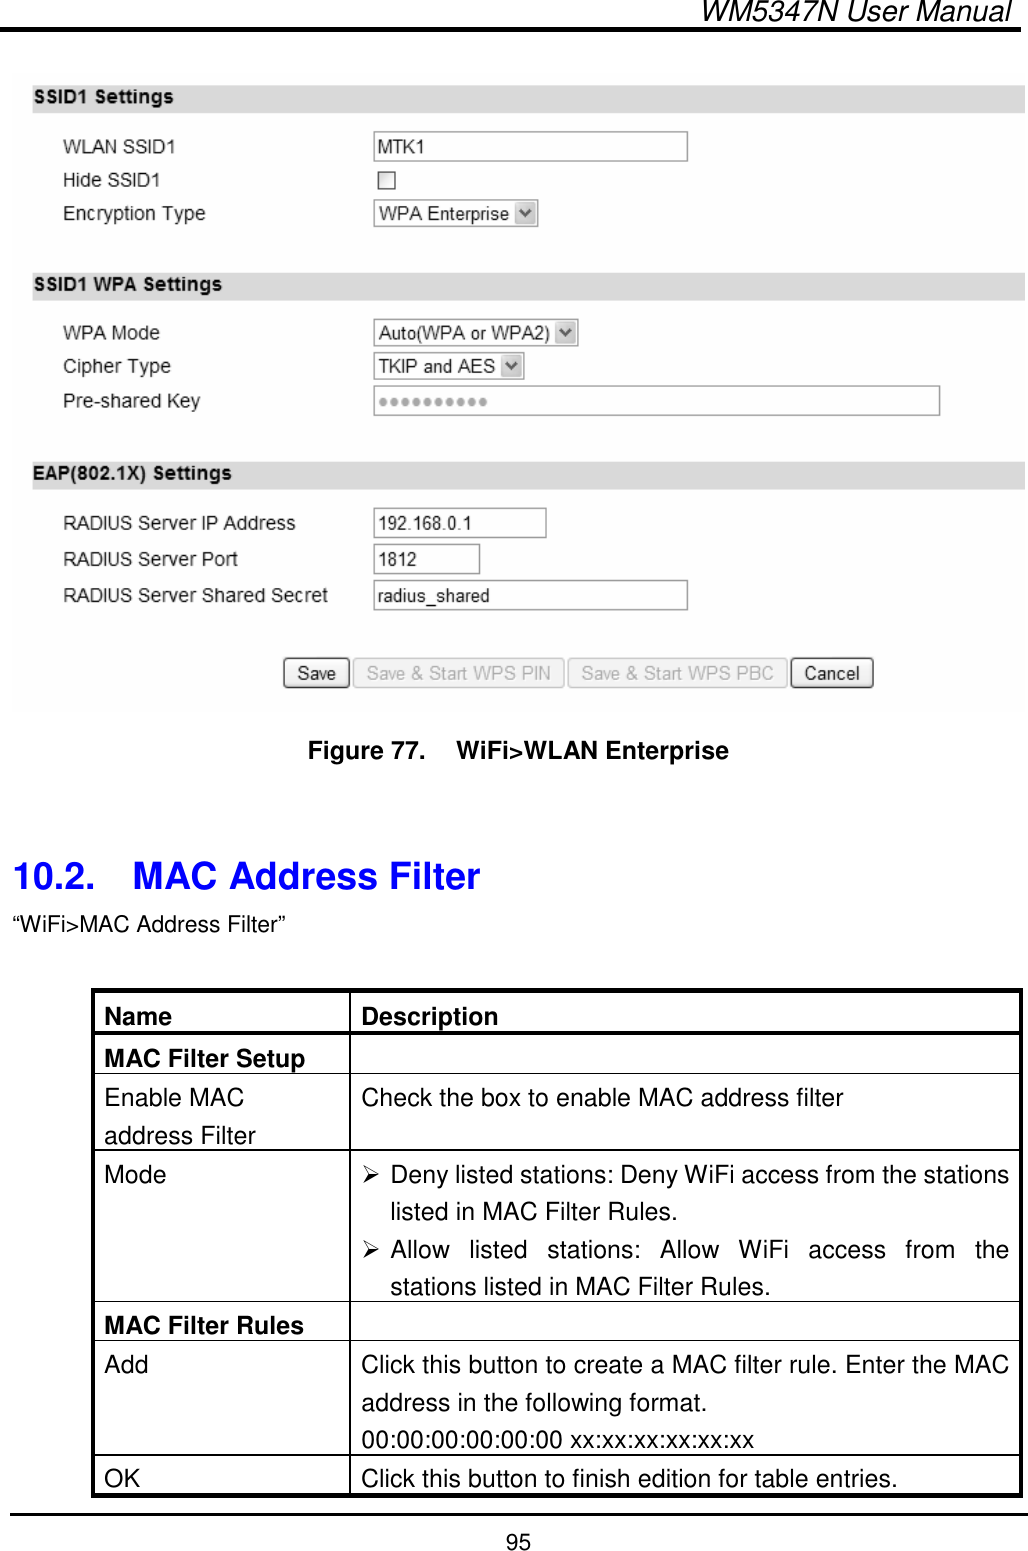  WM5347N User Manual  95  Figure 77.   WiFi&gt;WLAN Enterprise   10.2.  MAC Address Filter “WiFi&gt;MAC Address Filter”  Name  Description MAC Filter Setup   Enable MAC address Filter Check the box to enable MAC address filter Mode   Deny listed stations: Deny WiFi access from the stations listed in MAC Filter Rules.  Allow  listed  stations:  Allow  WiFi  access  from  the stations listed in MAC Filter Rules. MAC Filter Rules   Add  Click this button to create a MAC filter rule. Enter the MAC address in the following format. 00:00:00:00:00:00 xx:xx:xx:xx:xx:xx OK  Click this button to finish edition for table entries. 